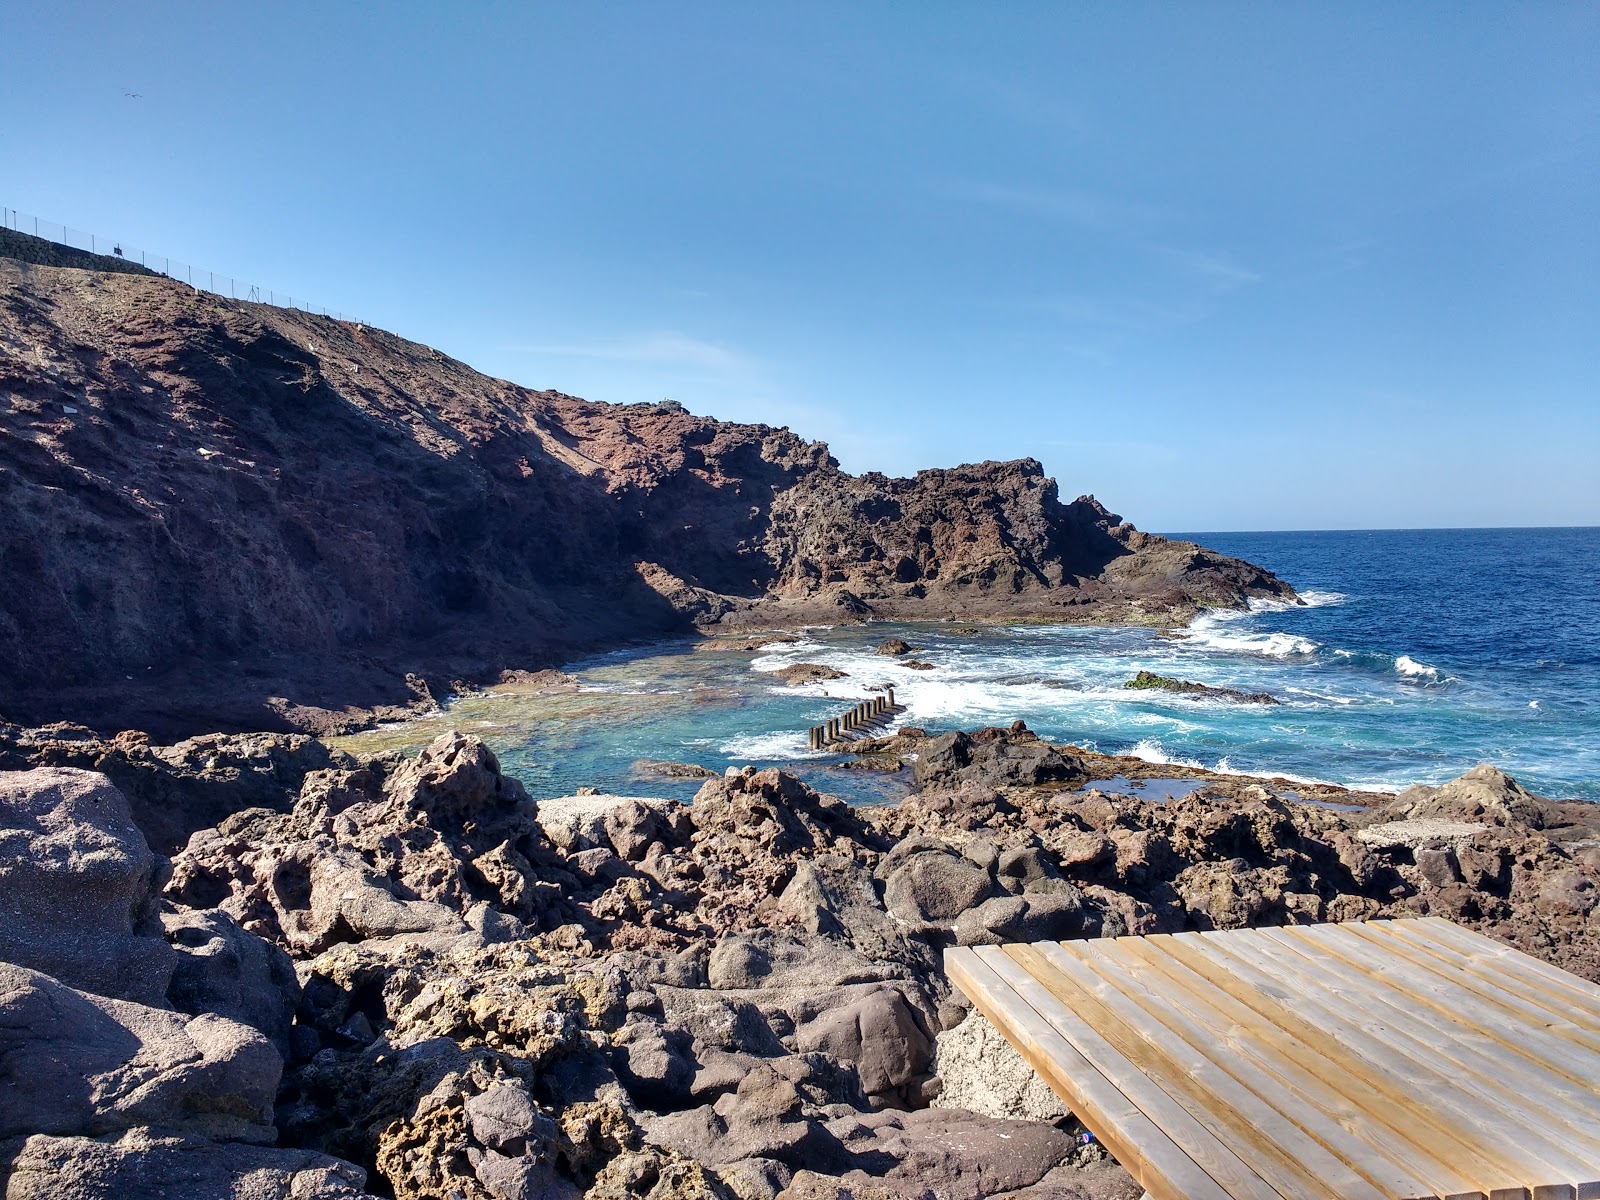 Photo of Punta de Galdar with rocks cover surface